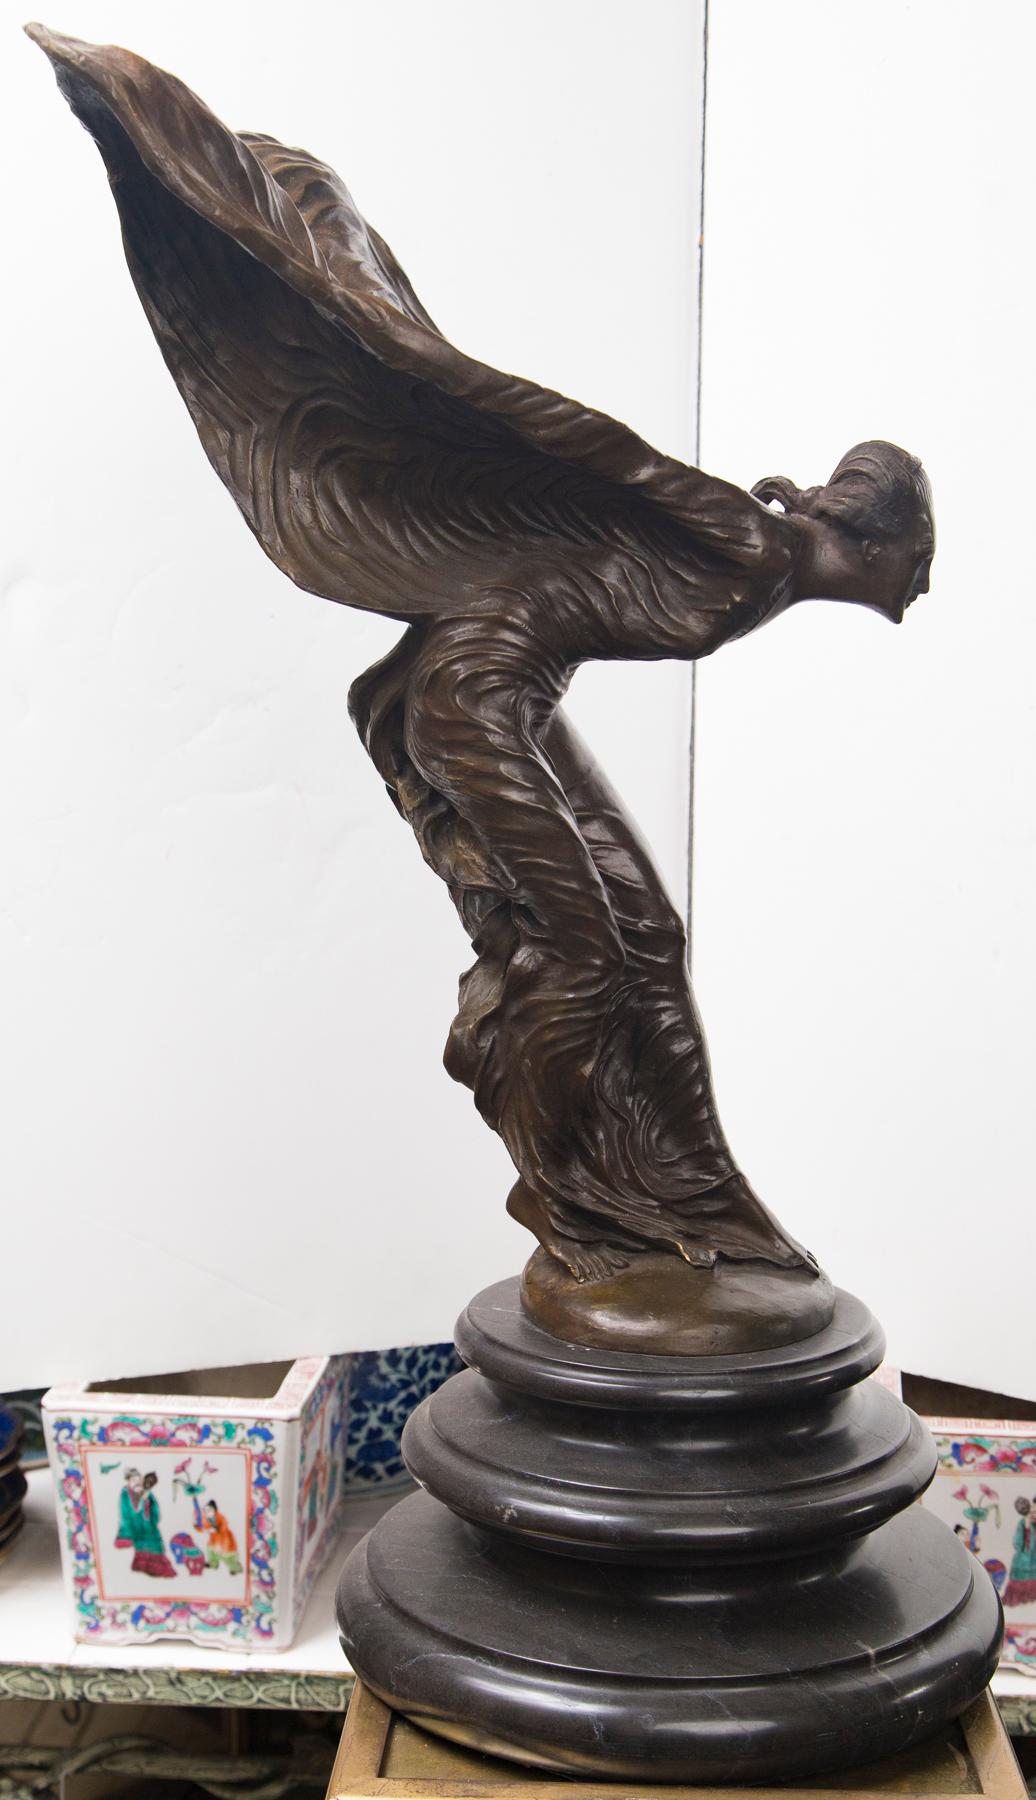 Raised on a black marble base, this statue, by Charles Sykes numbered 14/50. Signed C Sykes . This is the hood ornament mascot of Rolls Royce.

Charles Robinson Sykes (18 December 1875 – 6 June 1950)[1] was an English sculptor, best known for